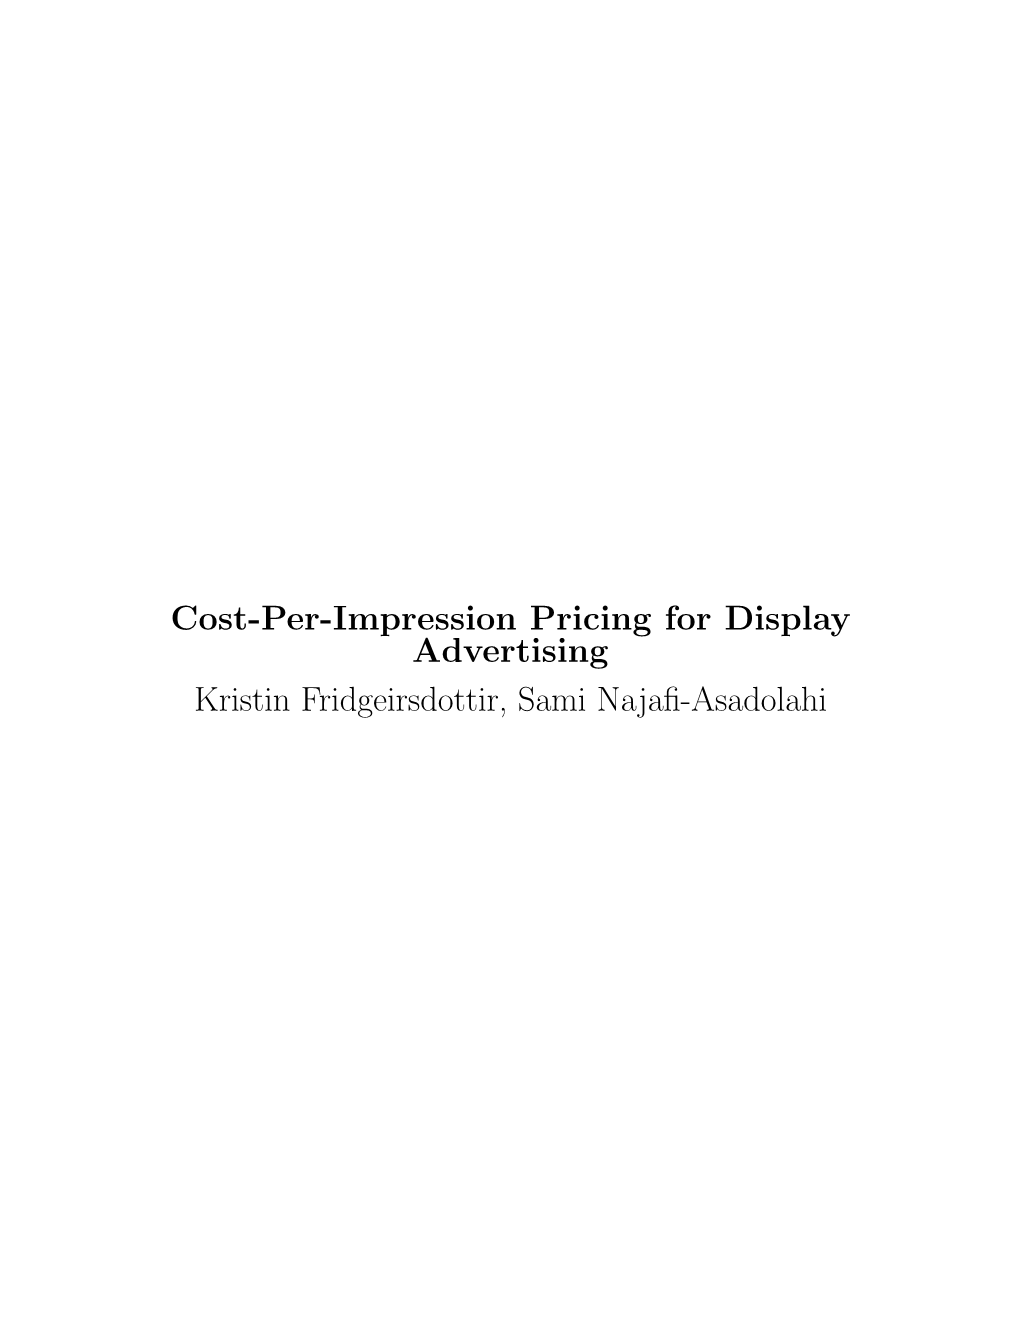 Cost-Per-Impression Pricing for Display Advertising